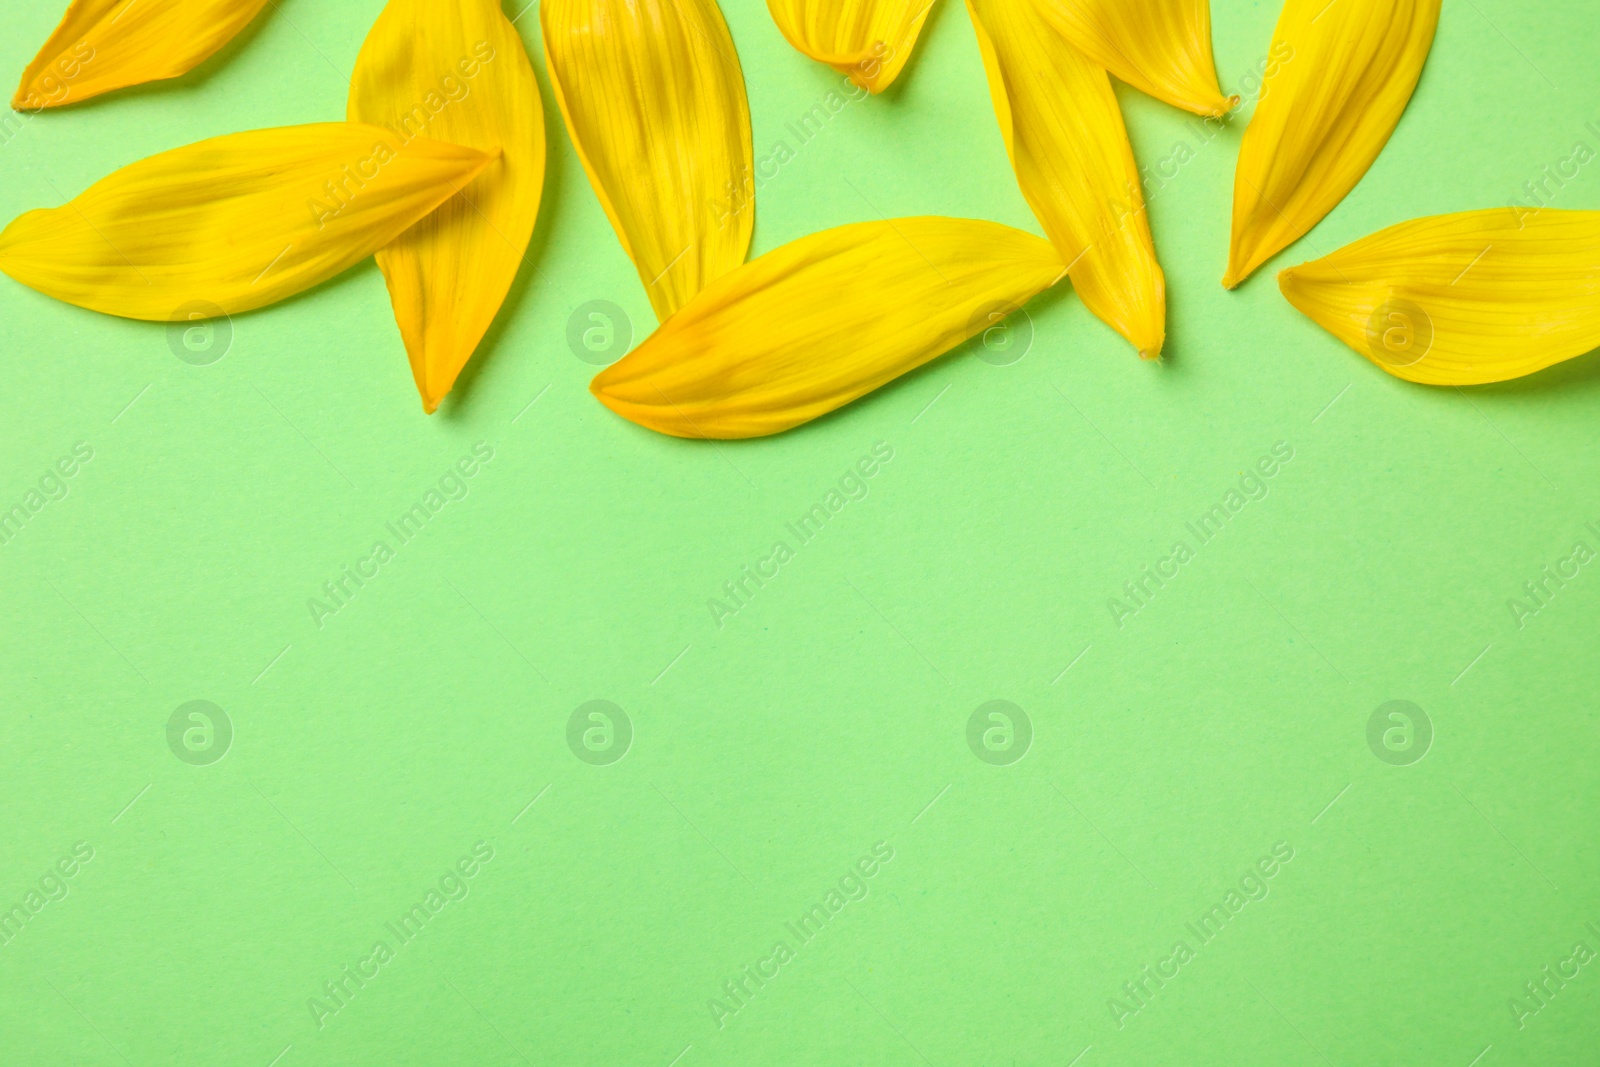 Photo of Fresh yellow sunflower petals on green background, flat lay. Space for text